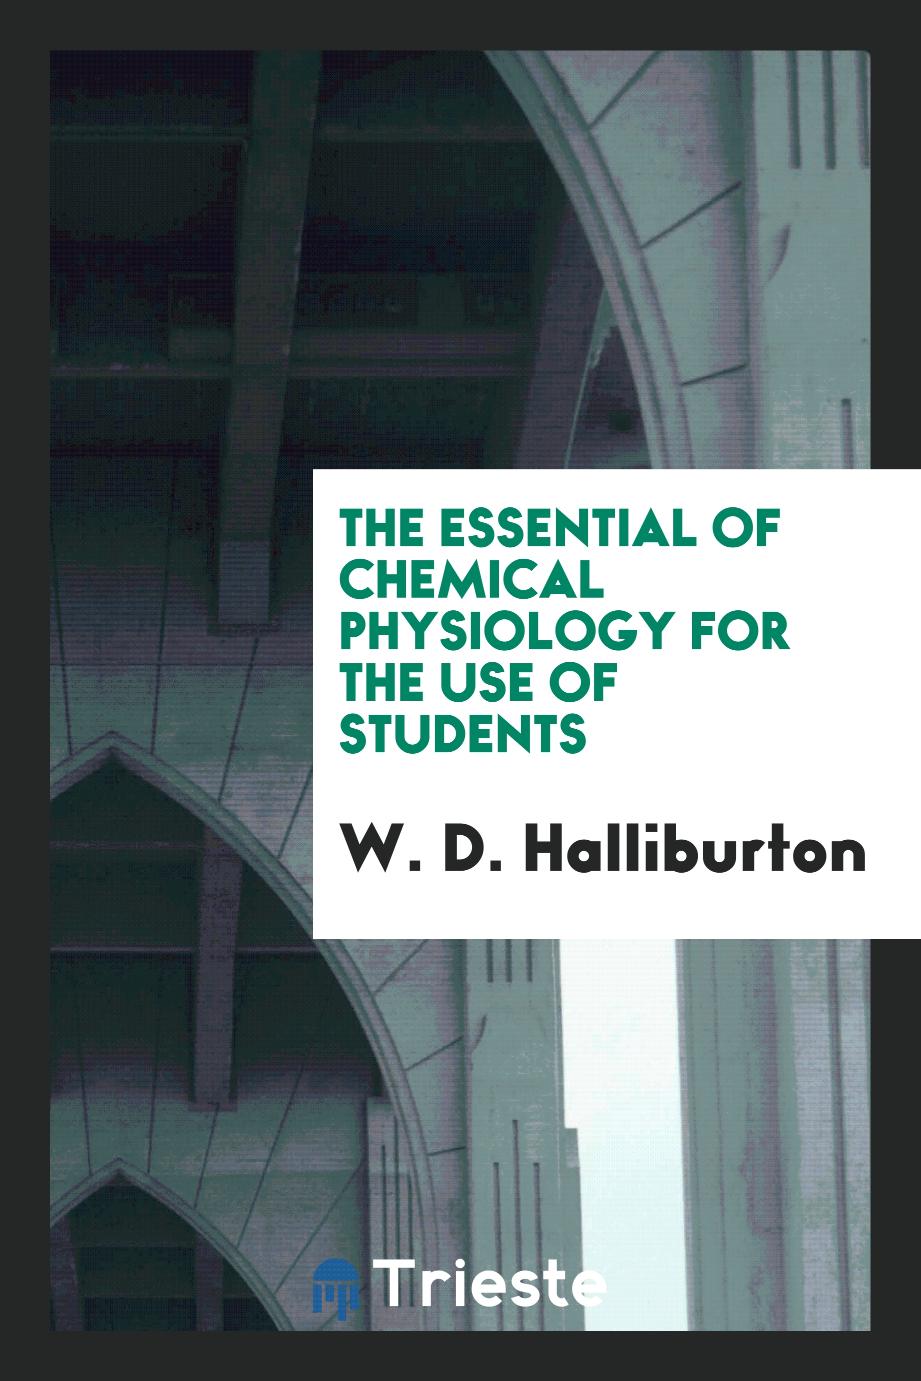 W. D. Halliburton - The Essential of Chemical Physiology for the Use of Students